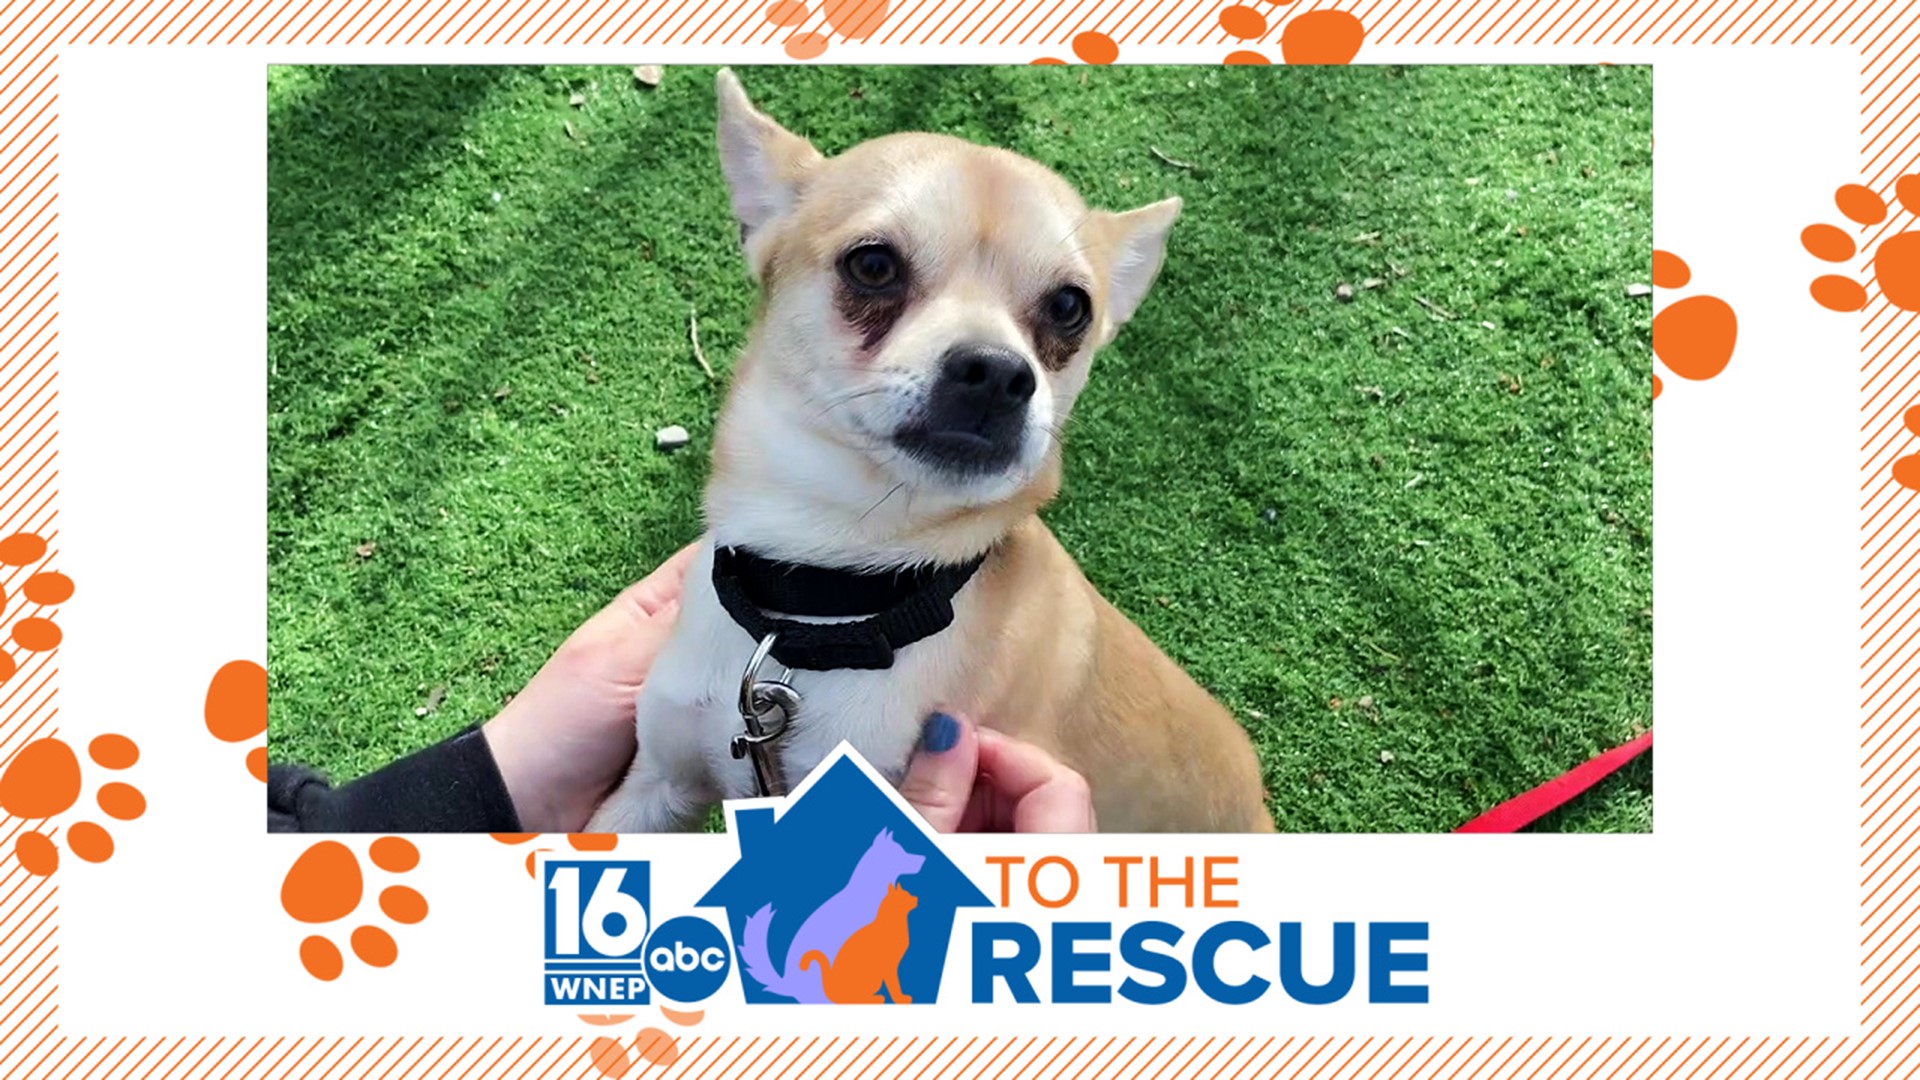 In this week's 16 To The Rescue, we meet a 2-year-old Chihuahua/mix who is looking for a new home.